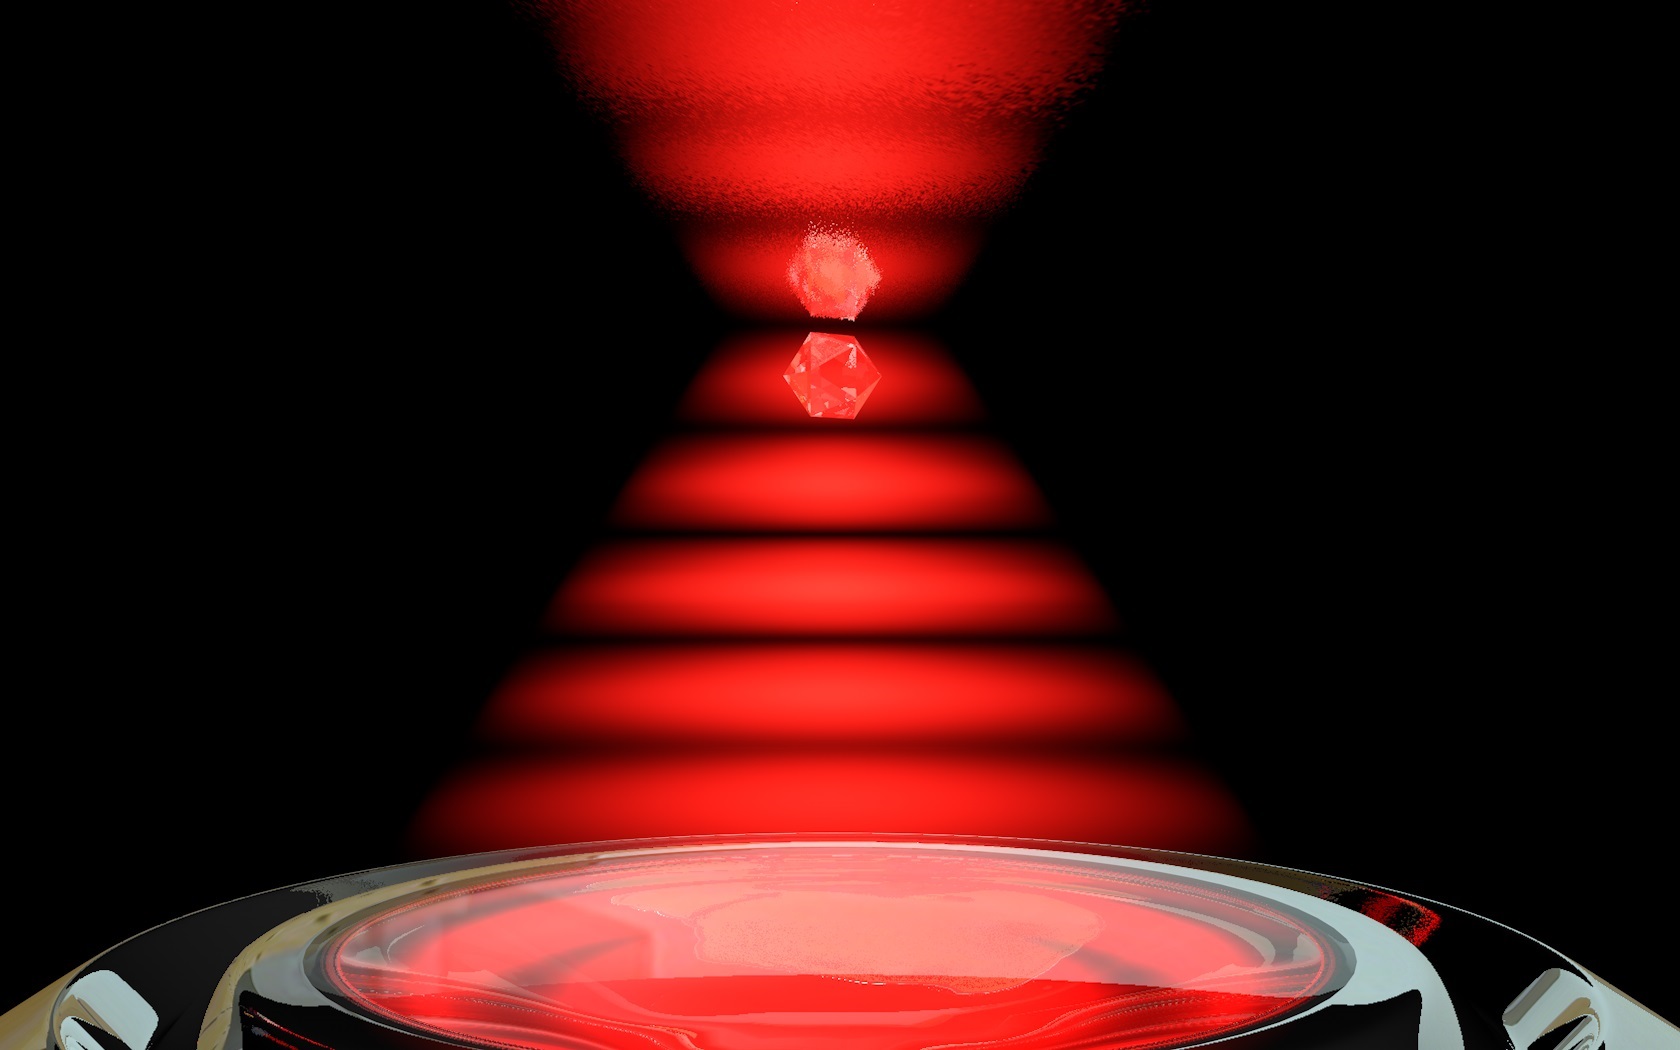 Artist’s impression of a nanodiamond trapped in a standing-wave optical trap near the surface of a silver mirror—both the ND and its mirror image are visible